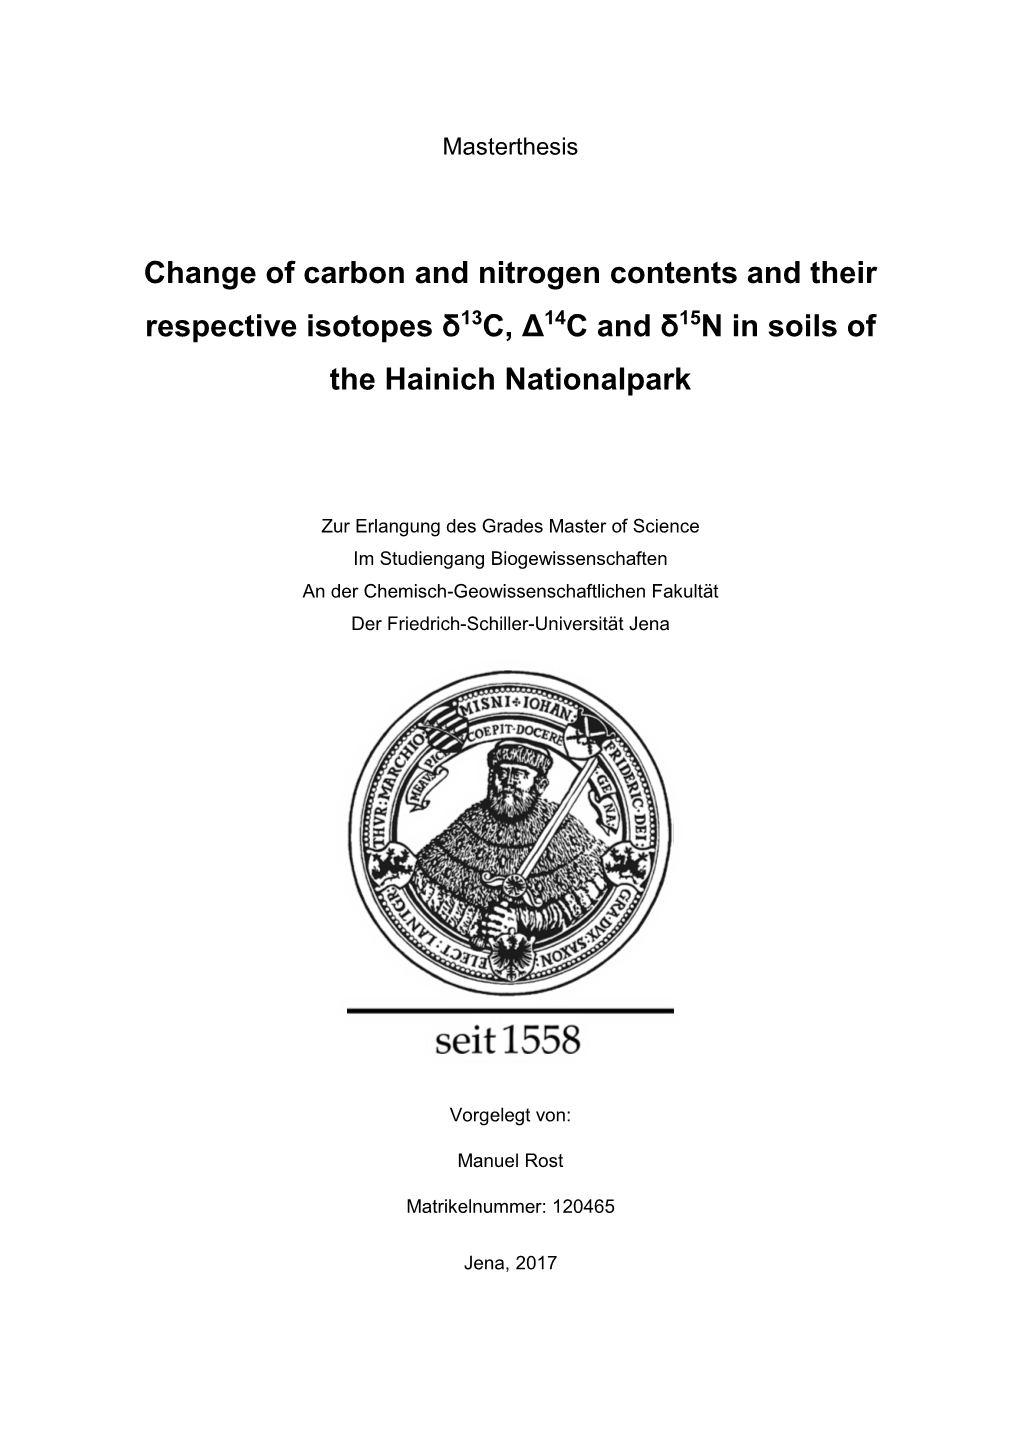 Change of Carbon and Nitrogen Contents and Their Respective Isotopes Δ13c, Δ14C and Δ15n in Soils of the Hainich Nationalpark